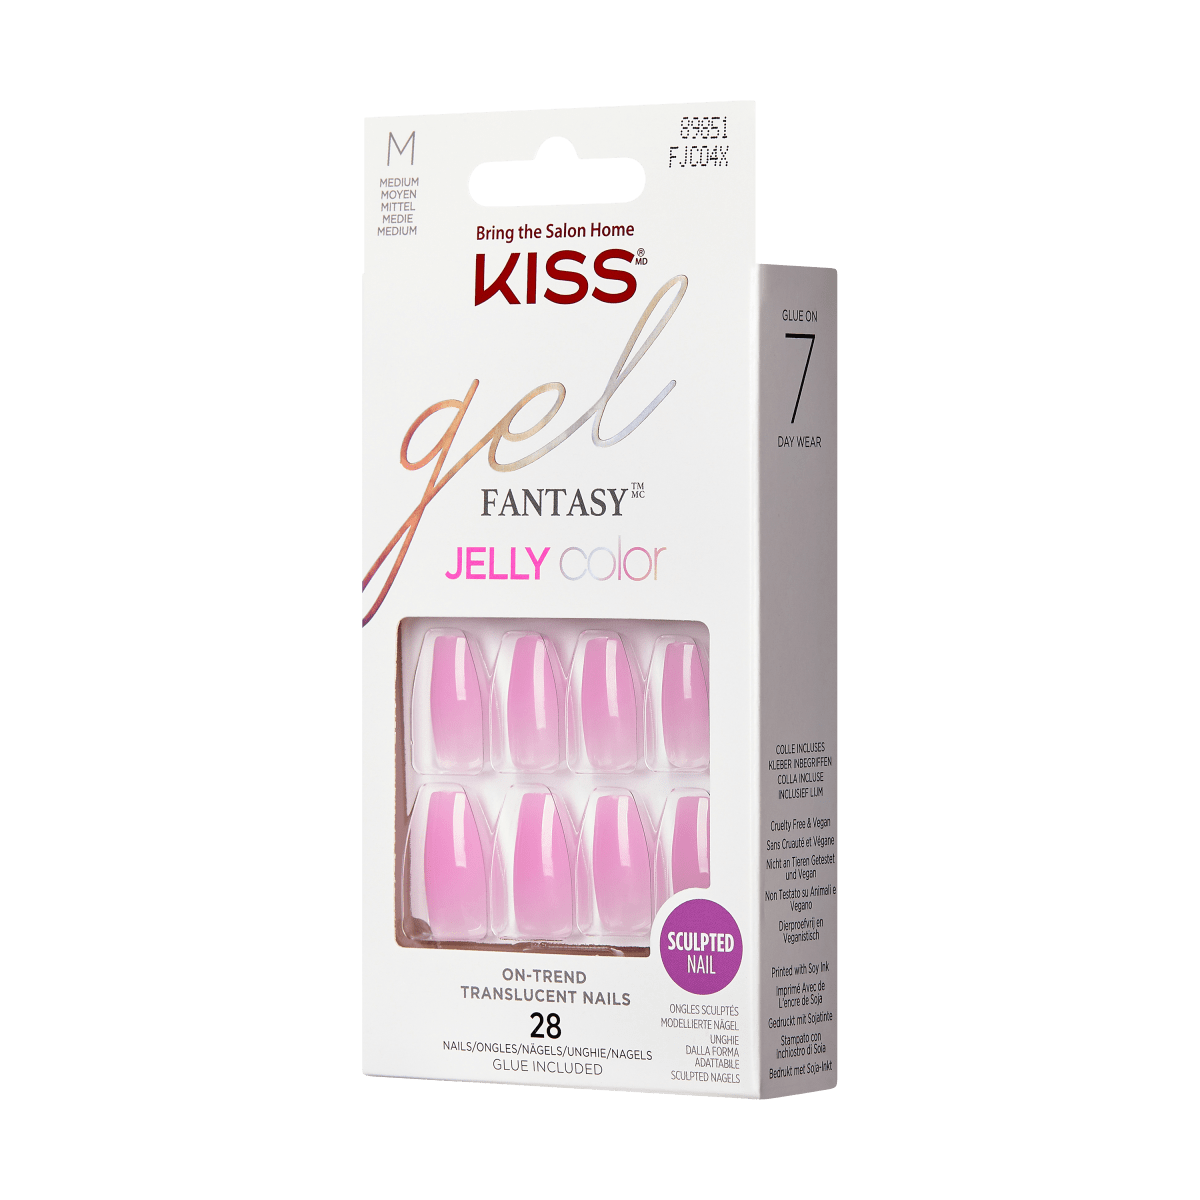 KISS Gel Fantasy Jelly Color Nails - Jelly In It